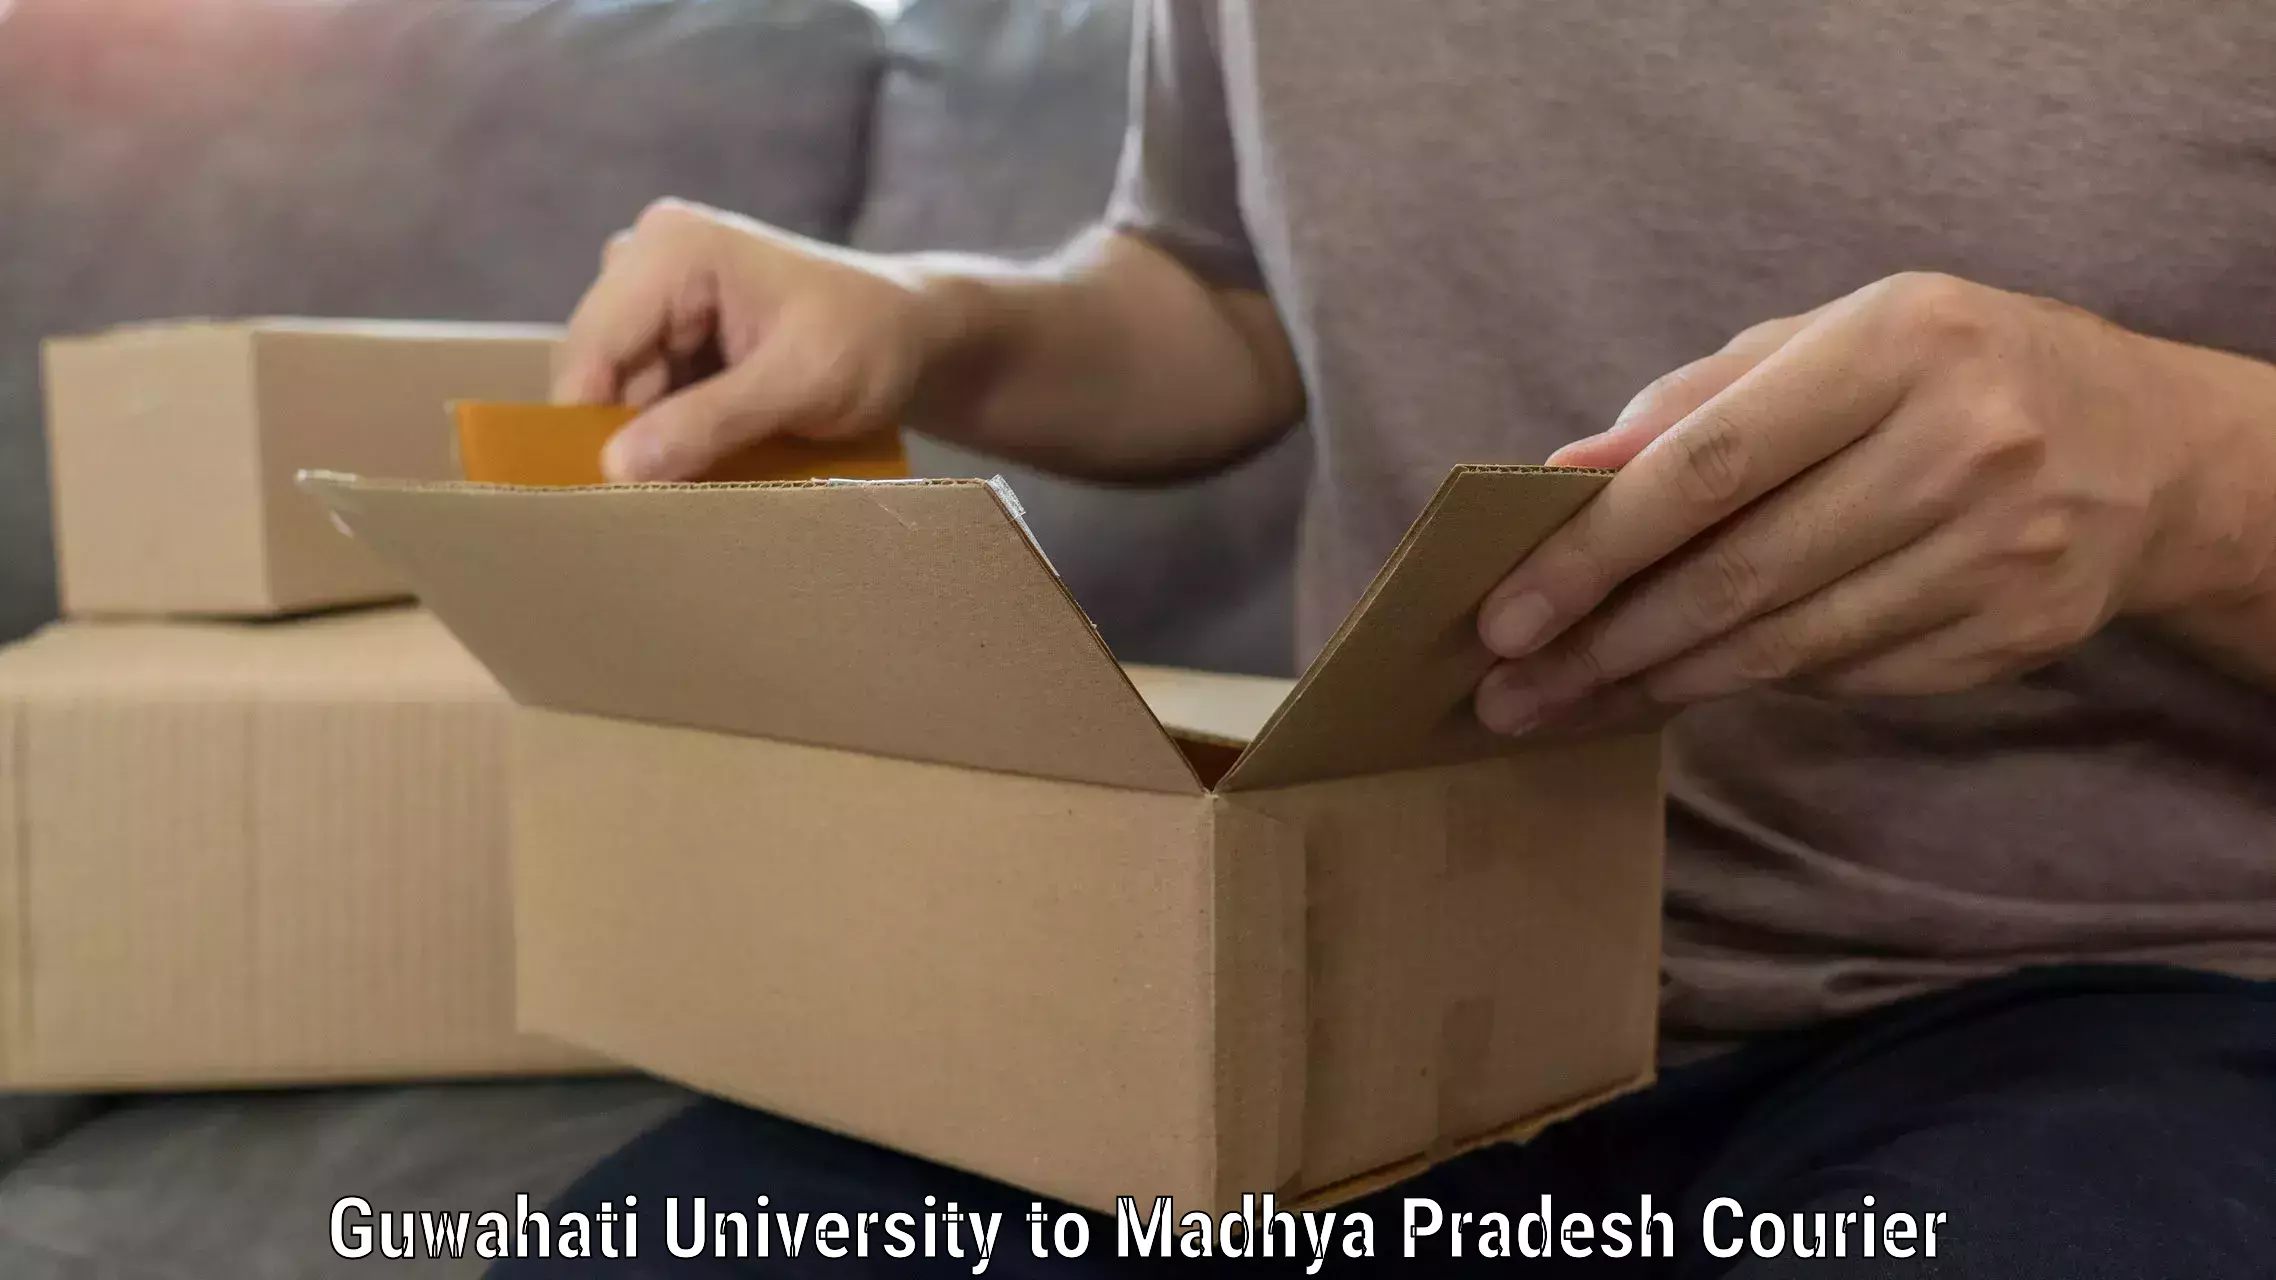 Efficient moving and packing Guwahati University to Athner